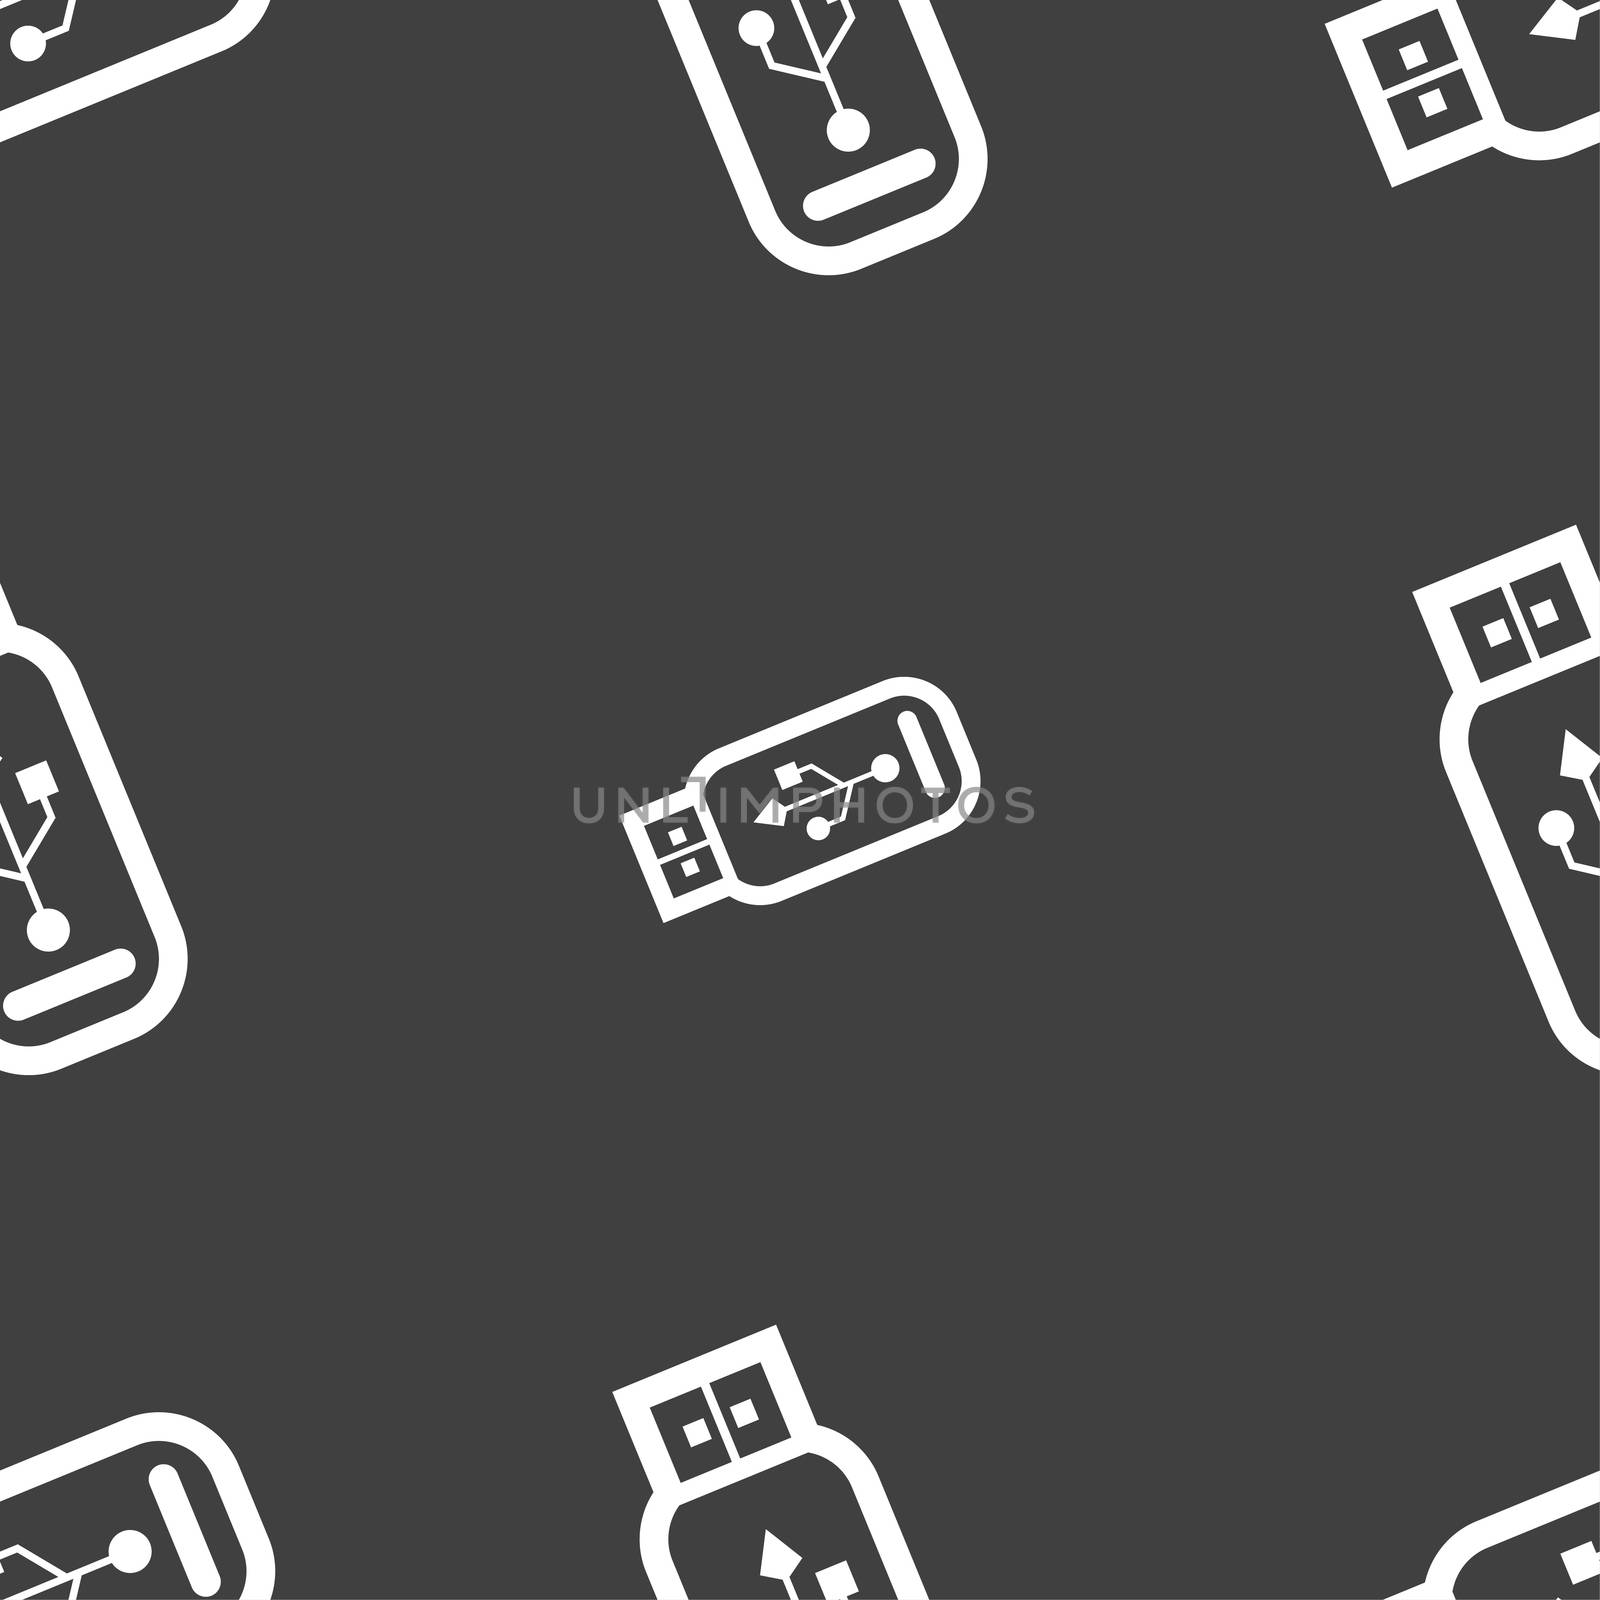 Usb flash drive icon sign. Seamless pattern on a gray background. illustration